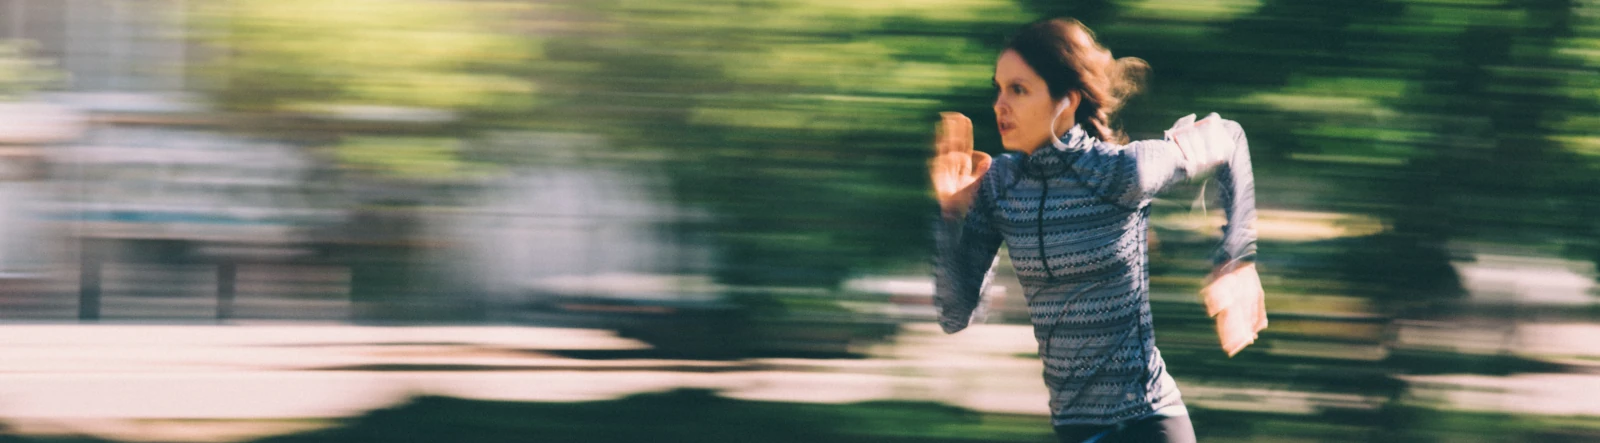 A woman running at speed with a motion-blurred background